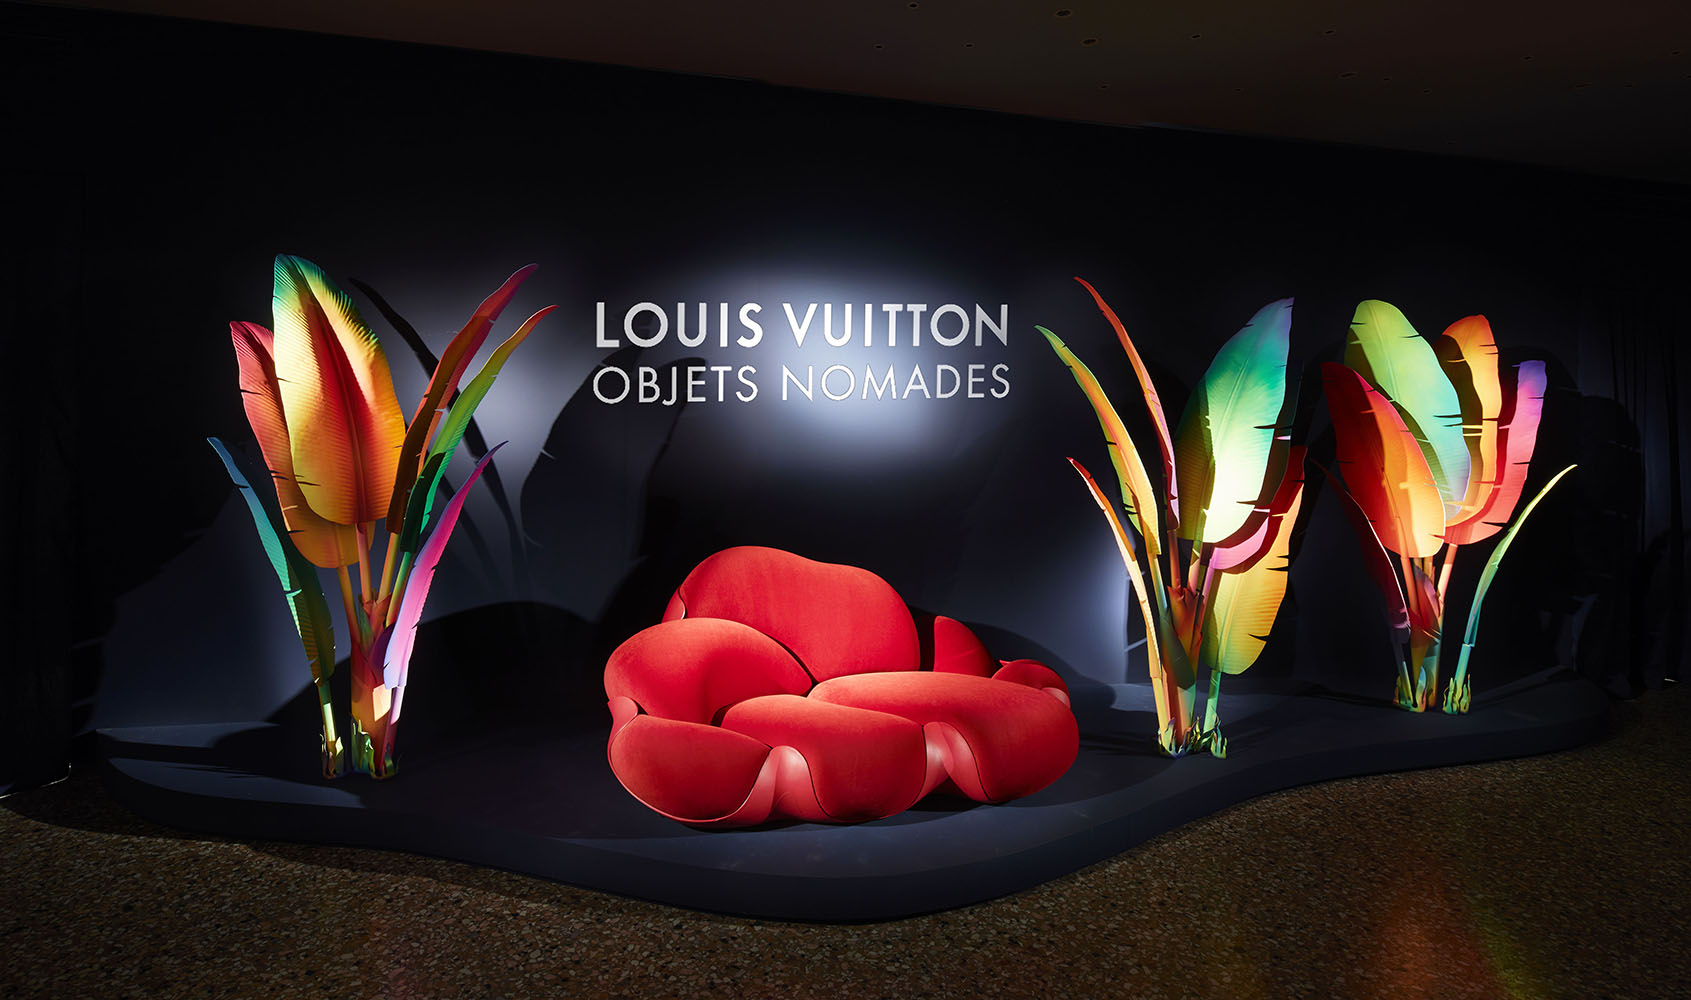 Fuorisalone 2019 Louis Vuitton, Objets Nomades